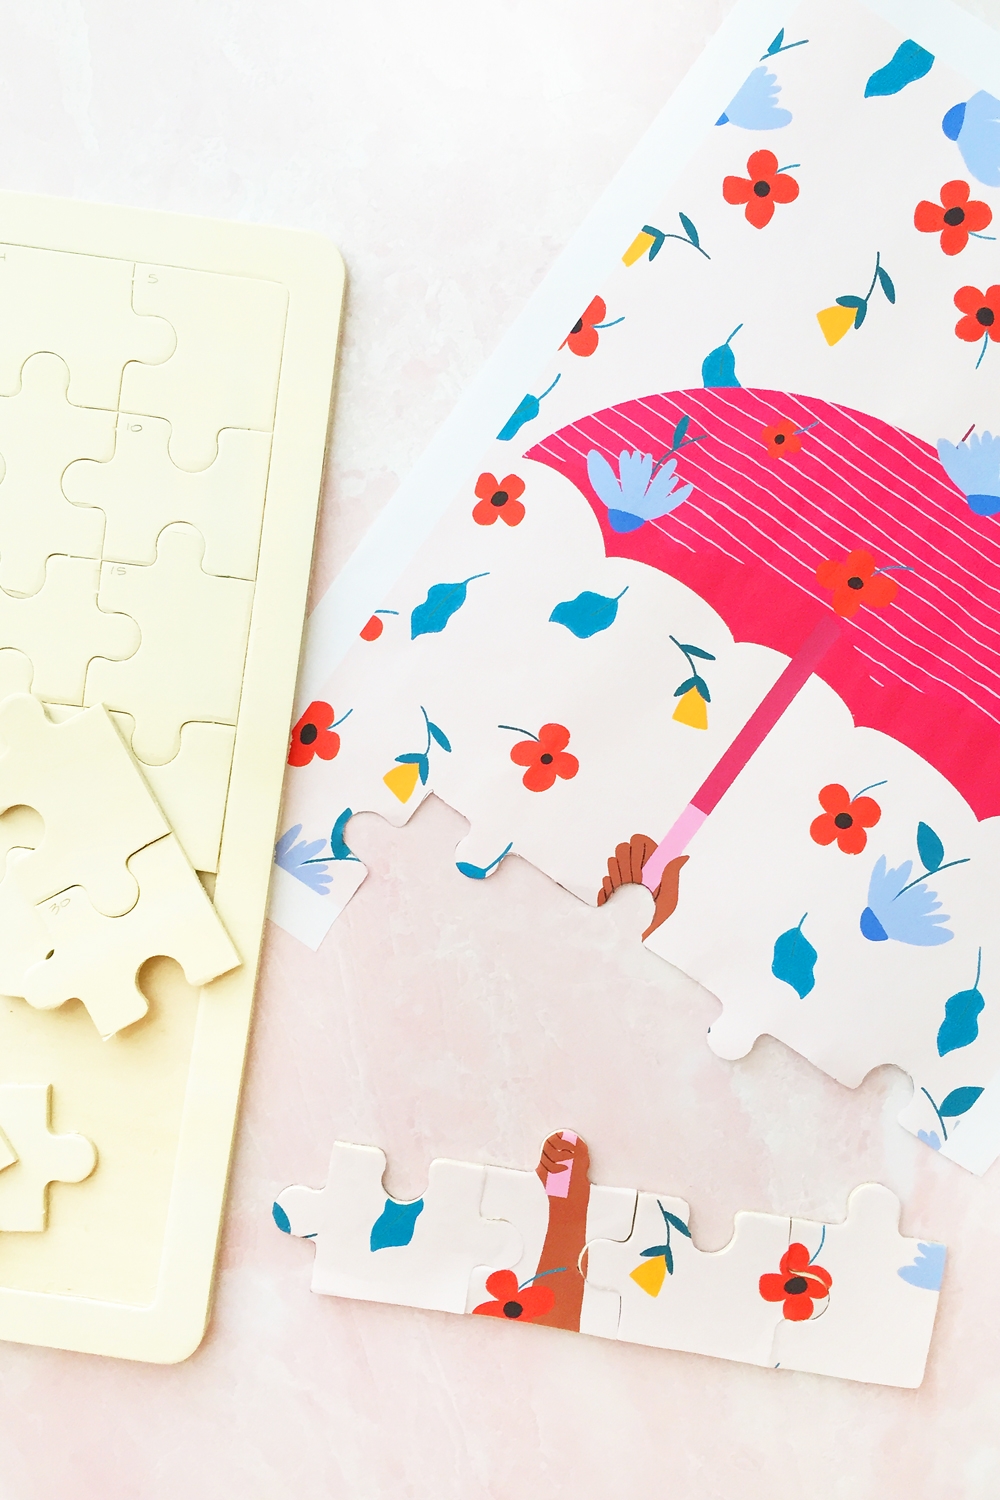 How To Make A DIY Puzzle With Artwork - Maritza Lisa